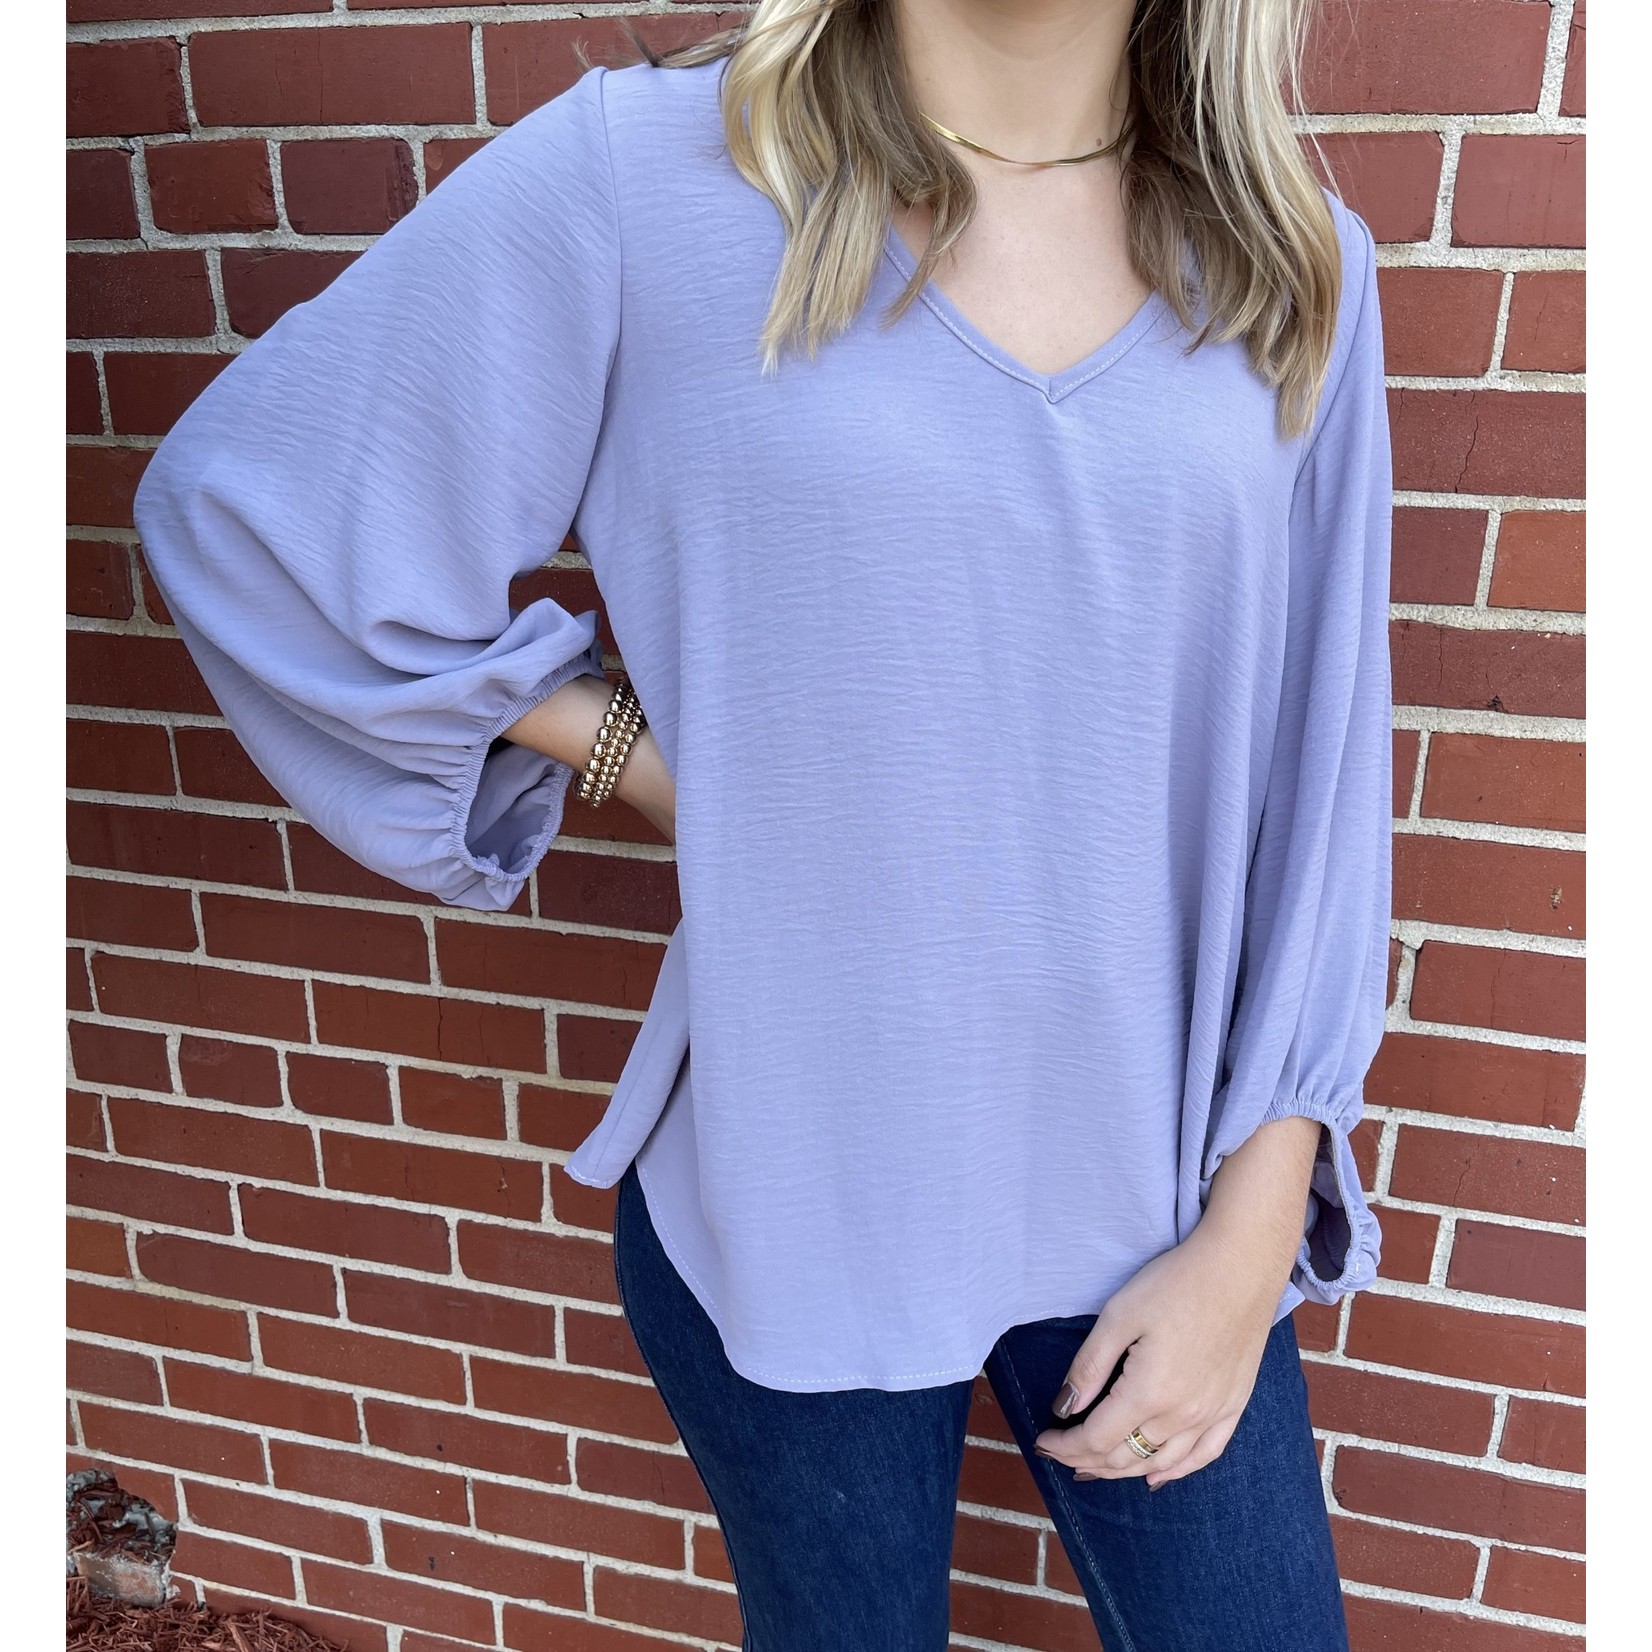 Jodifl V-Neck Top With Long Bubble Sleeves